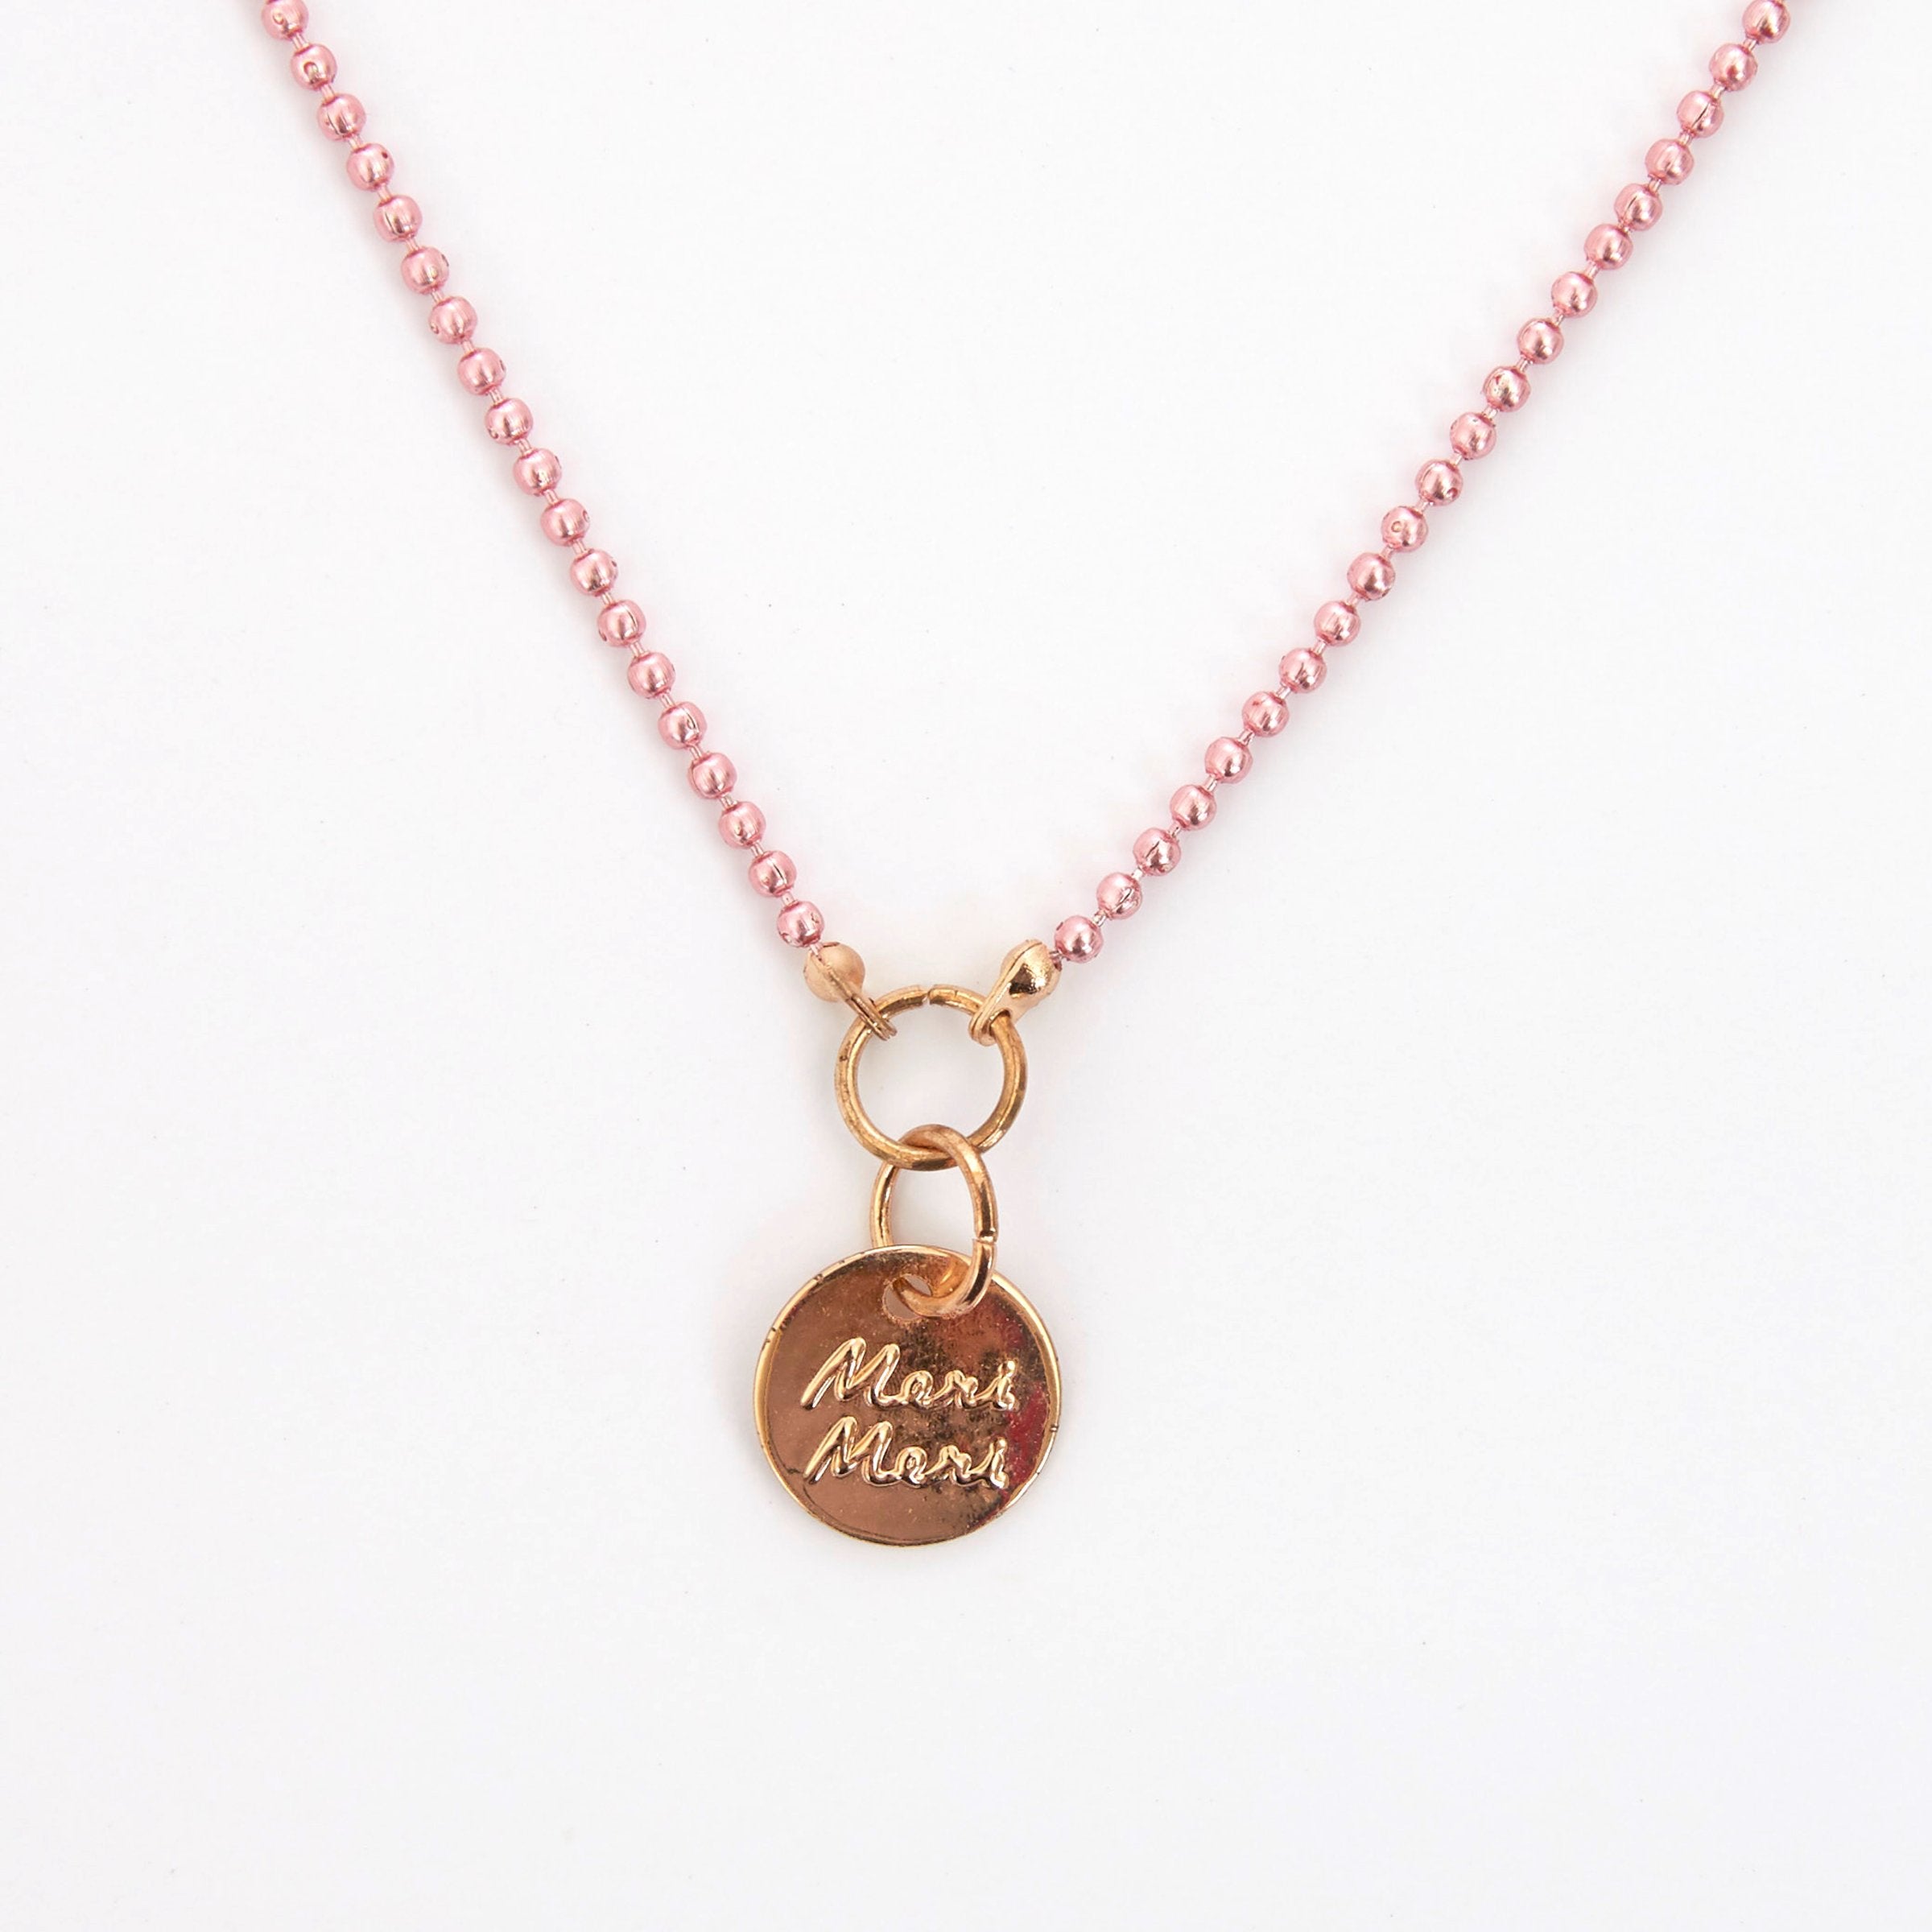 This pretty necklace features a padded felt bunny, sitting in a glittery pink leatherette pocket, with a pink bead chain.